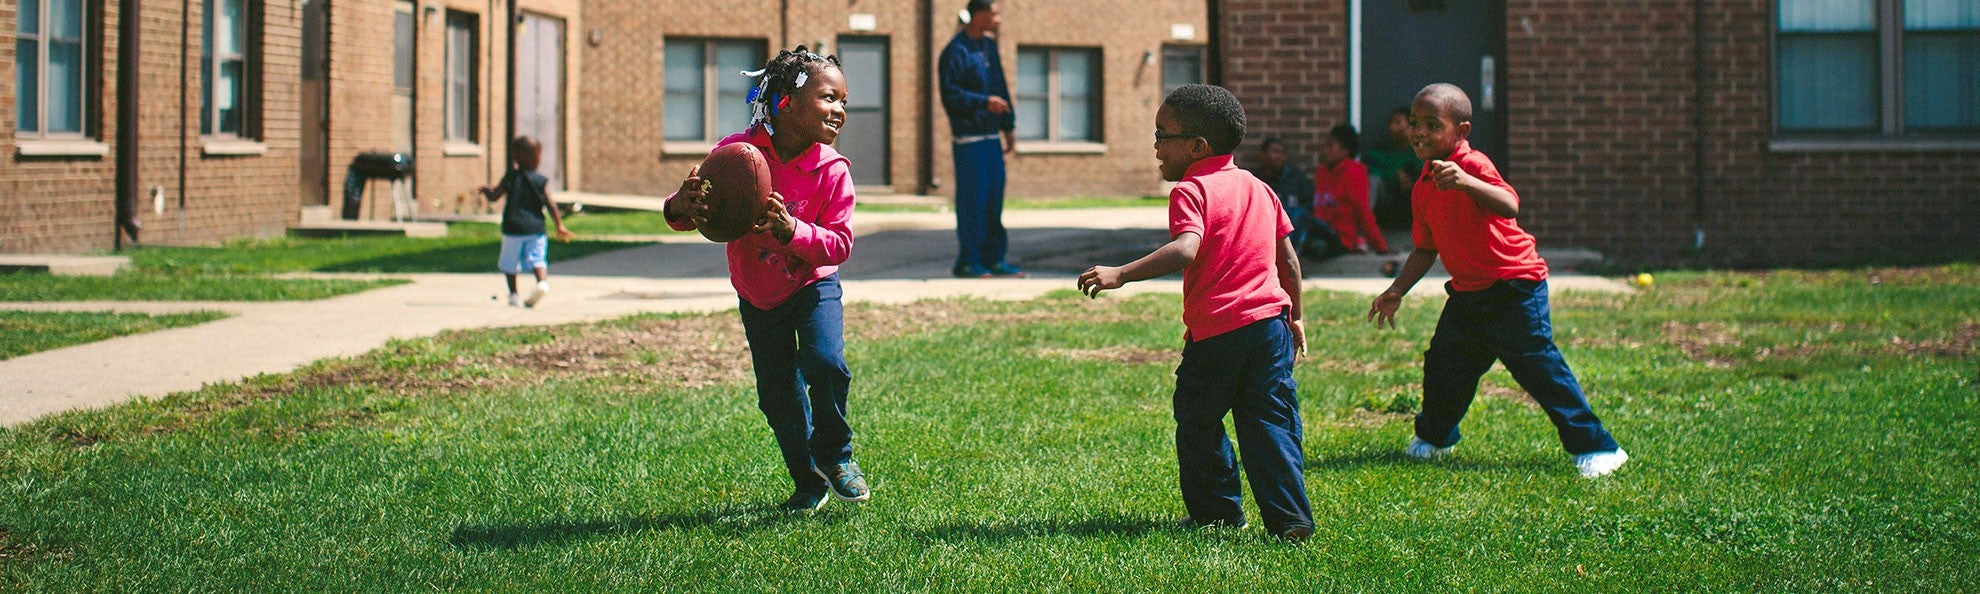 Children play at the West Calumet Housing Complex in East Chicago, Ind., in 2016.